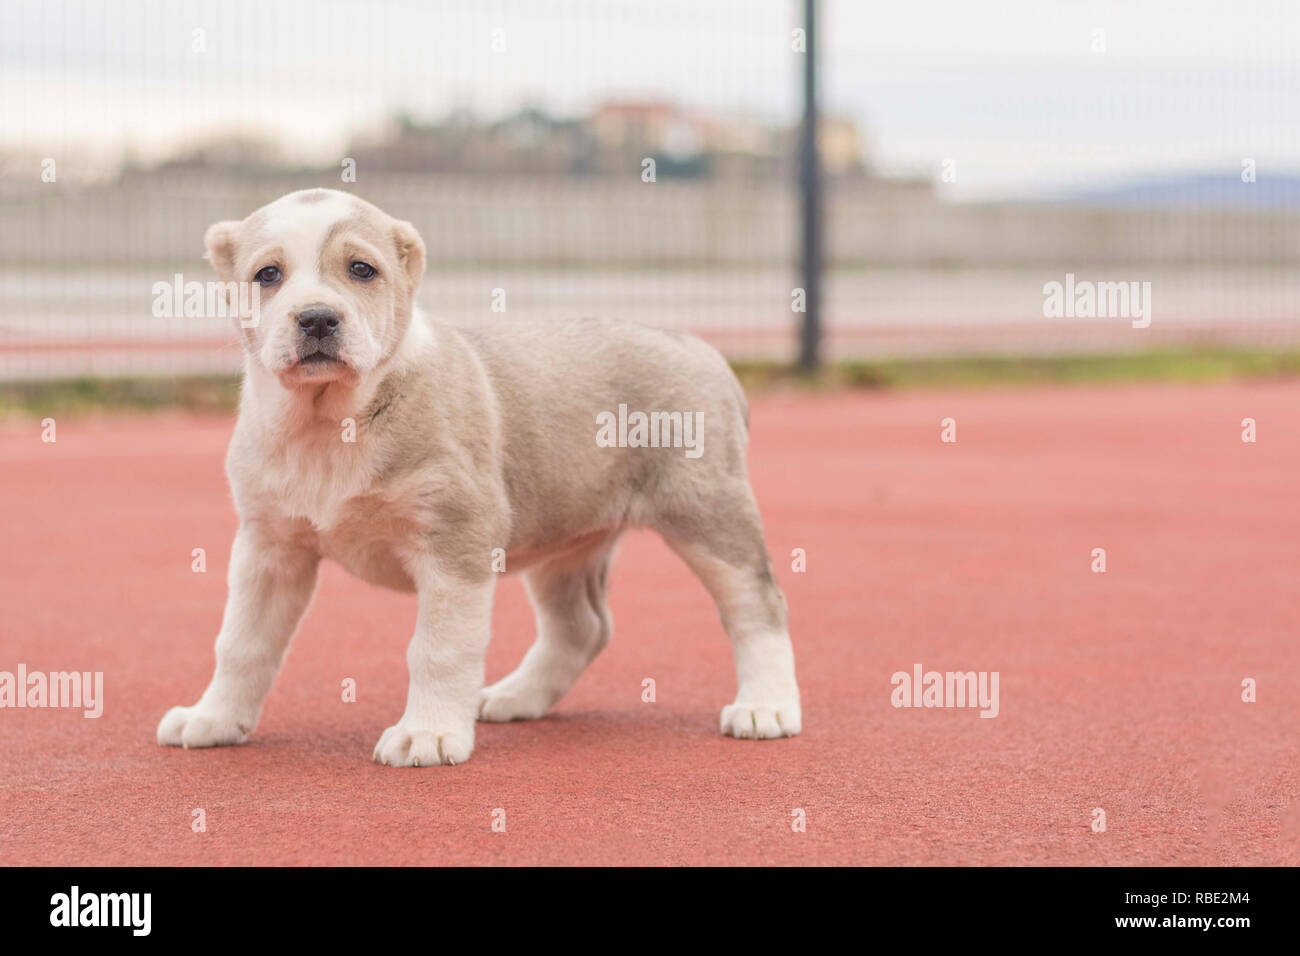 The puppy poses on the playground Stock Photo